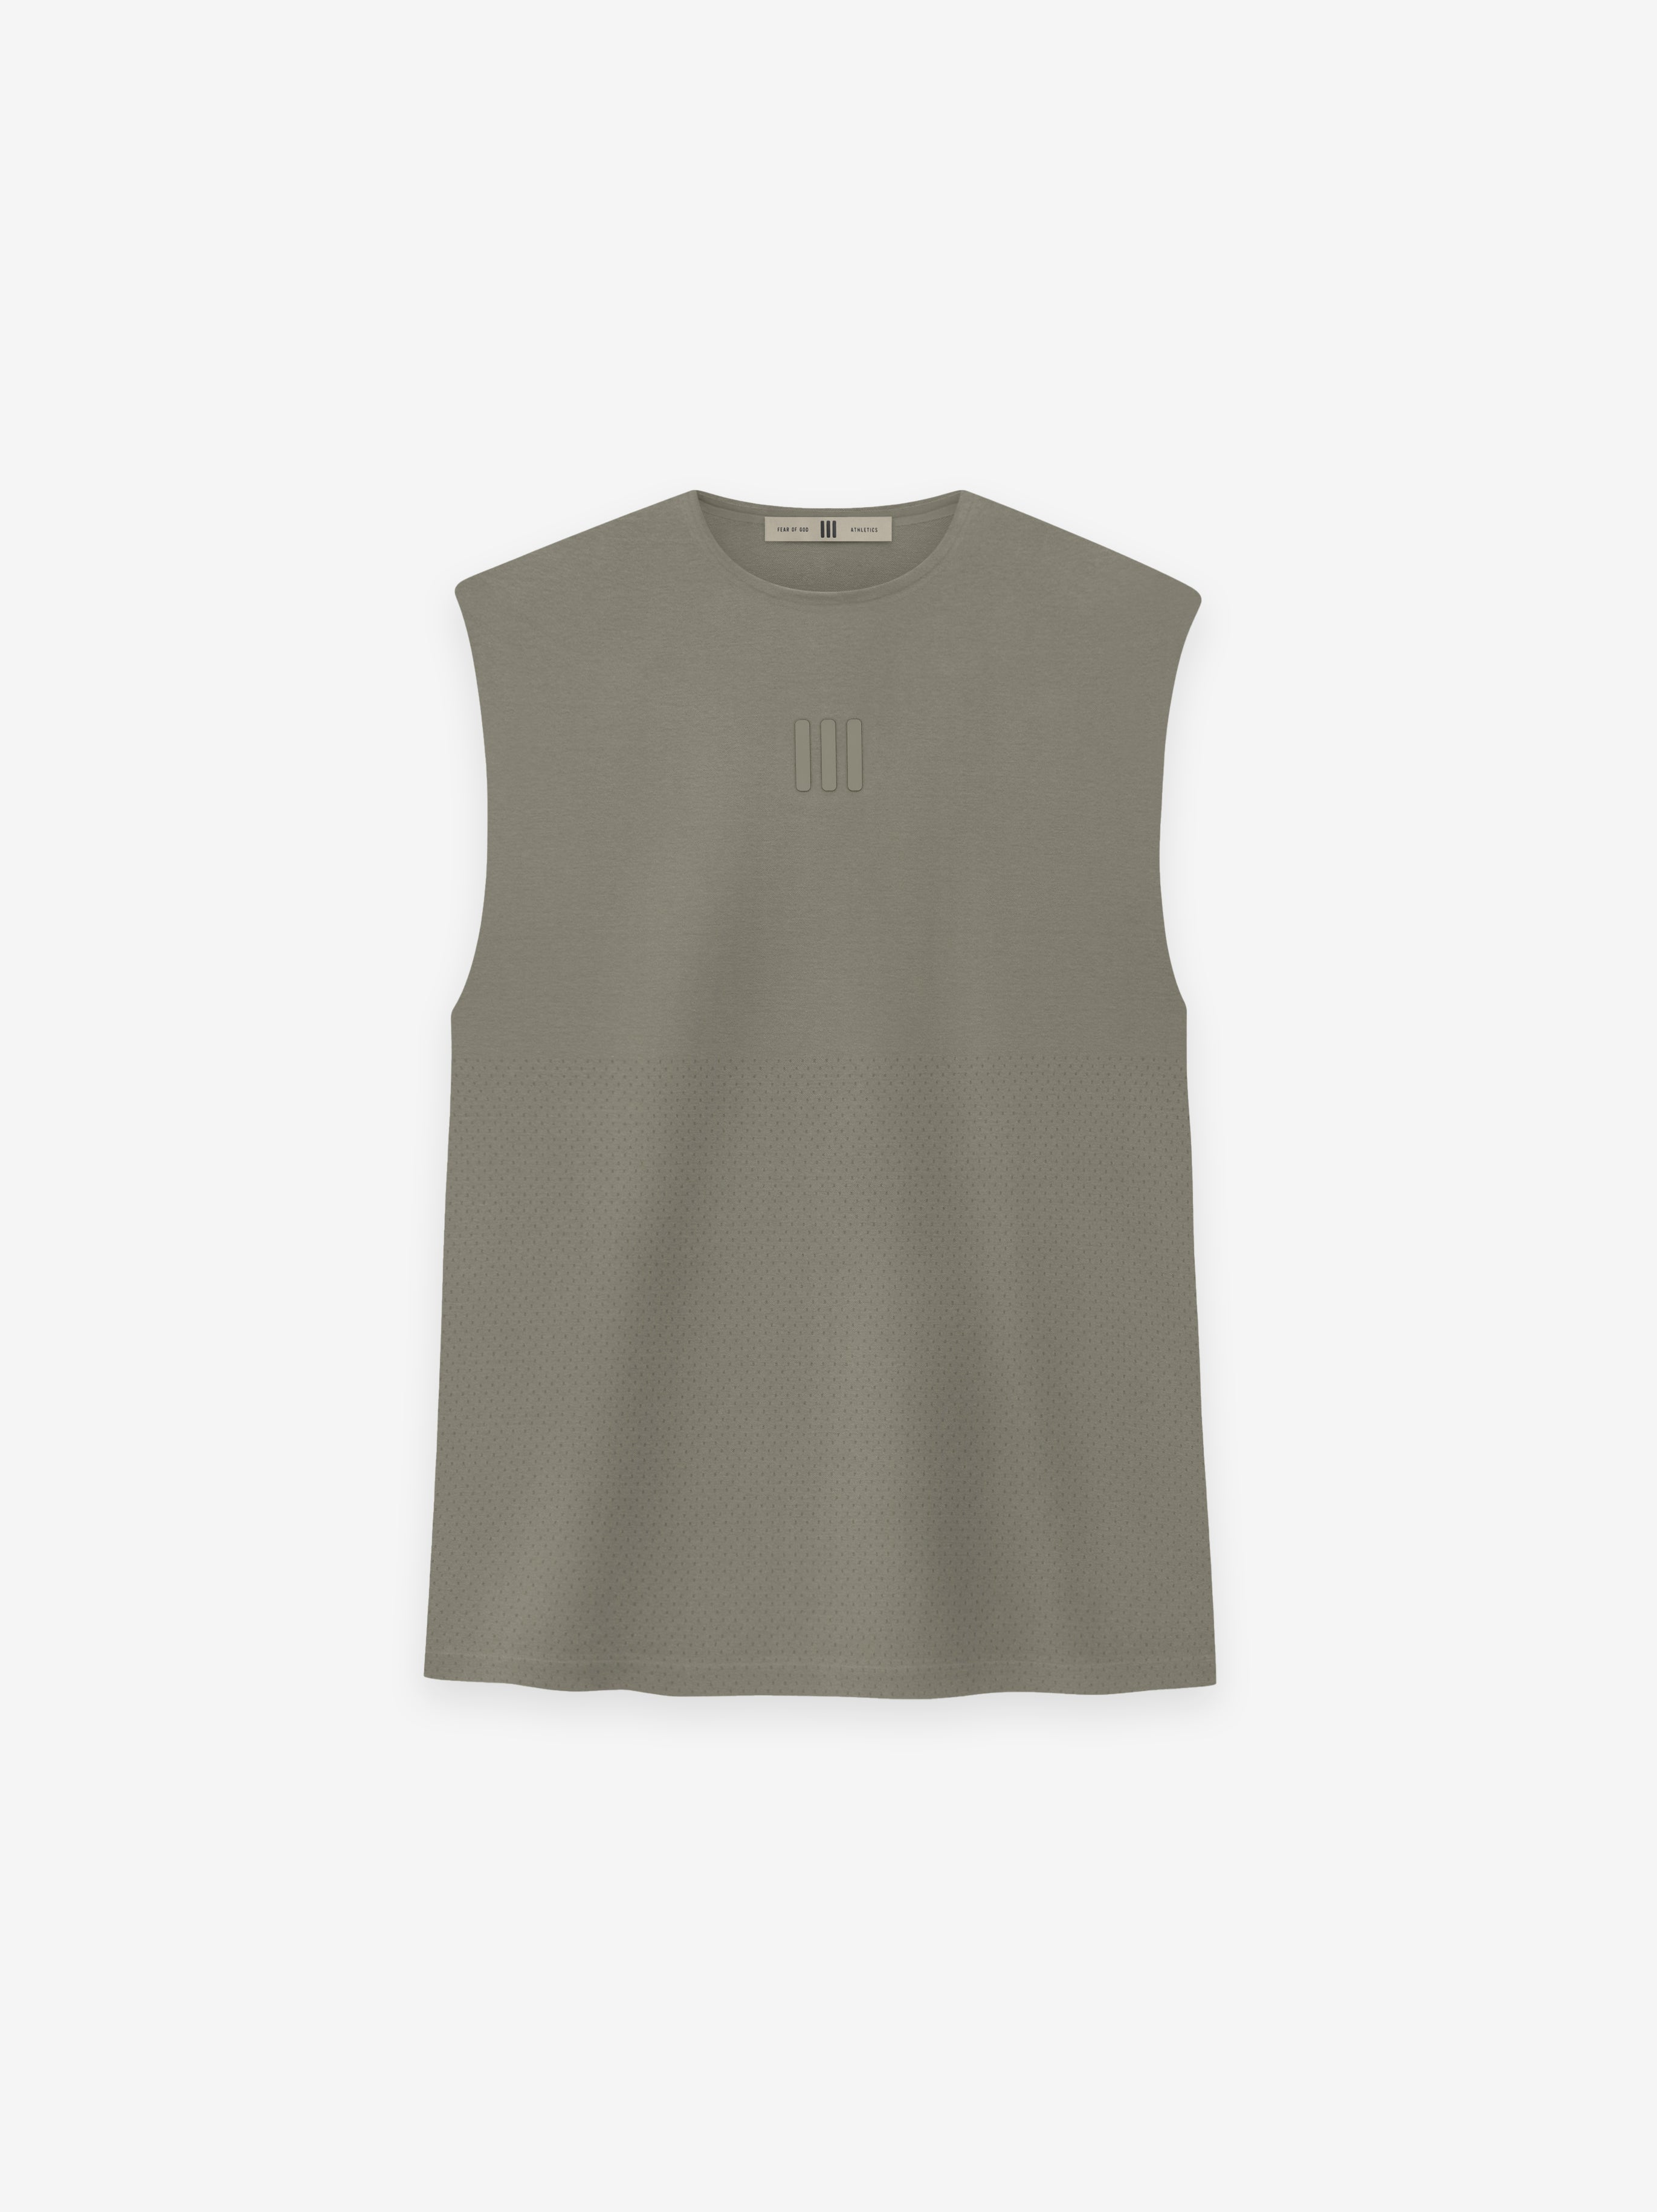 Performance Muscle Tee | Fear of God